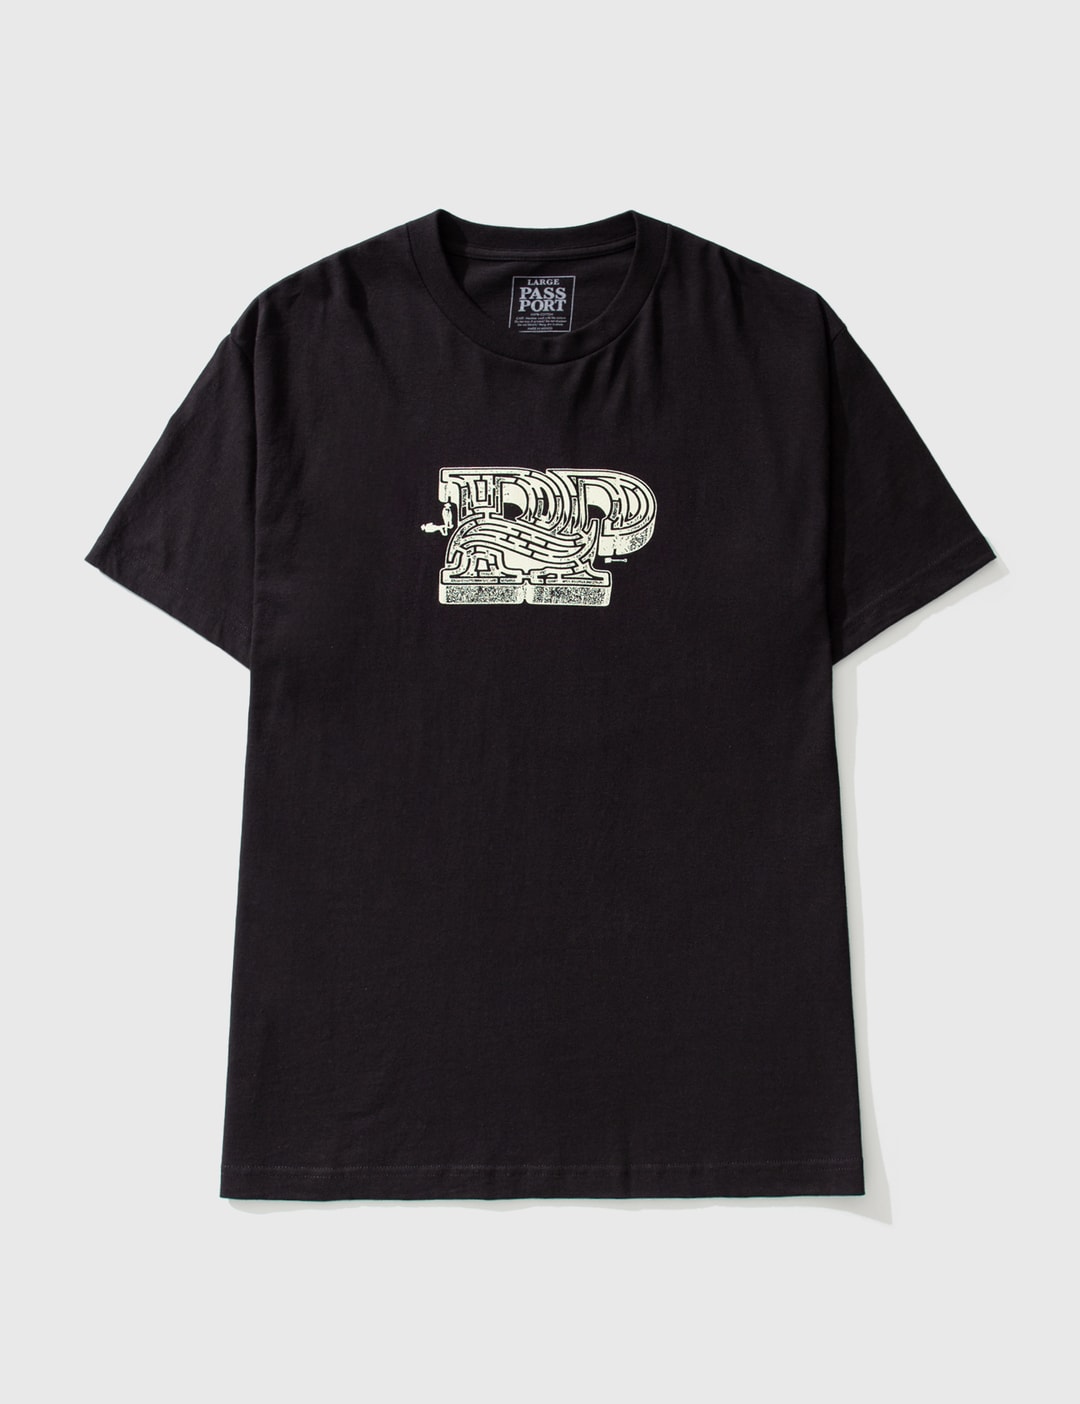 Pass~port - Maze T-shirt | HBX - Globally Curated Fashion and Lifestyle ...